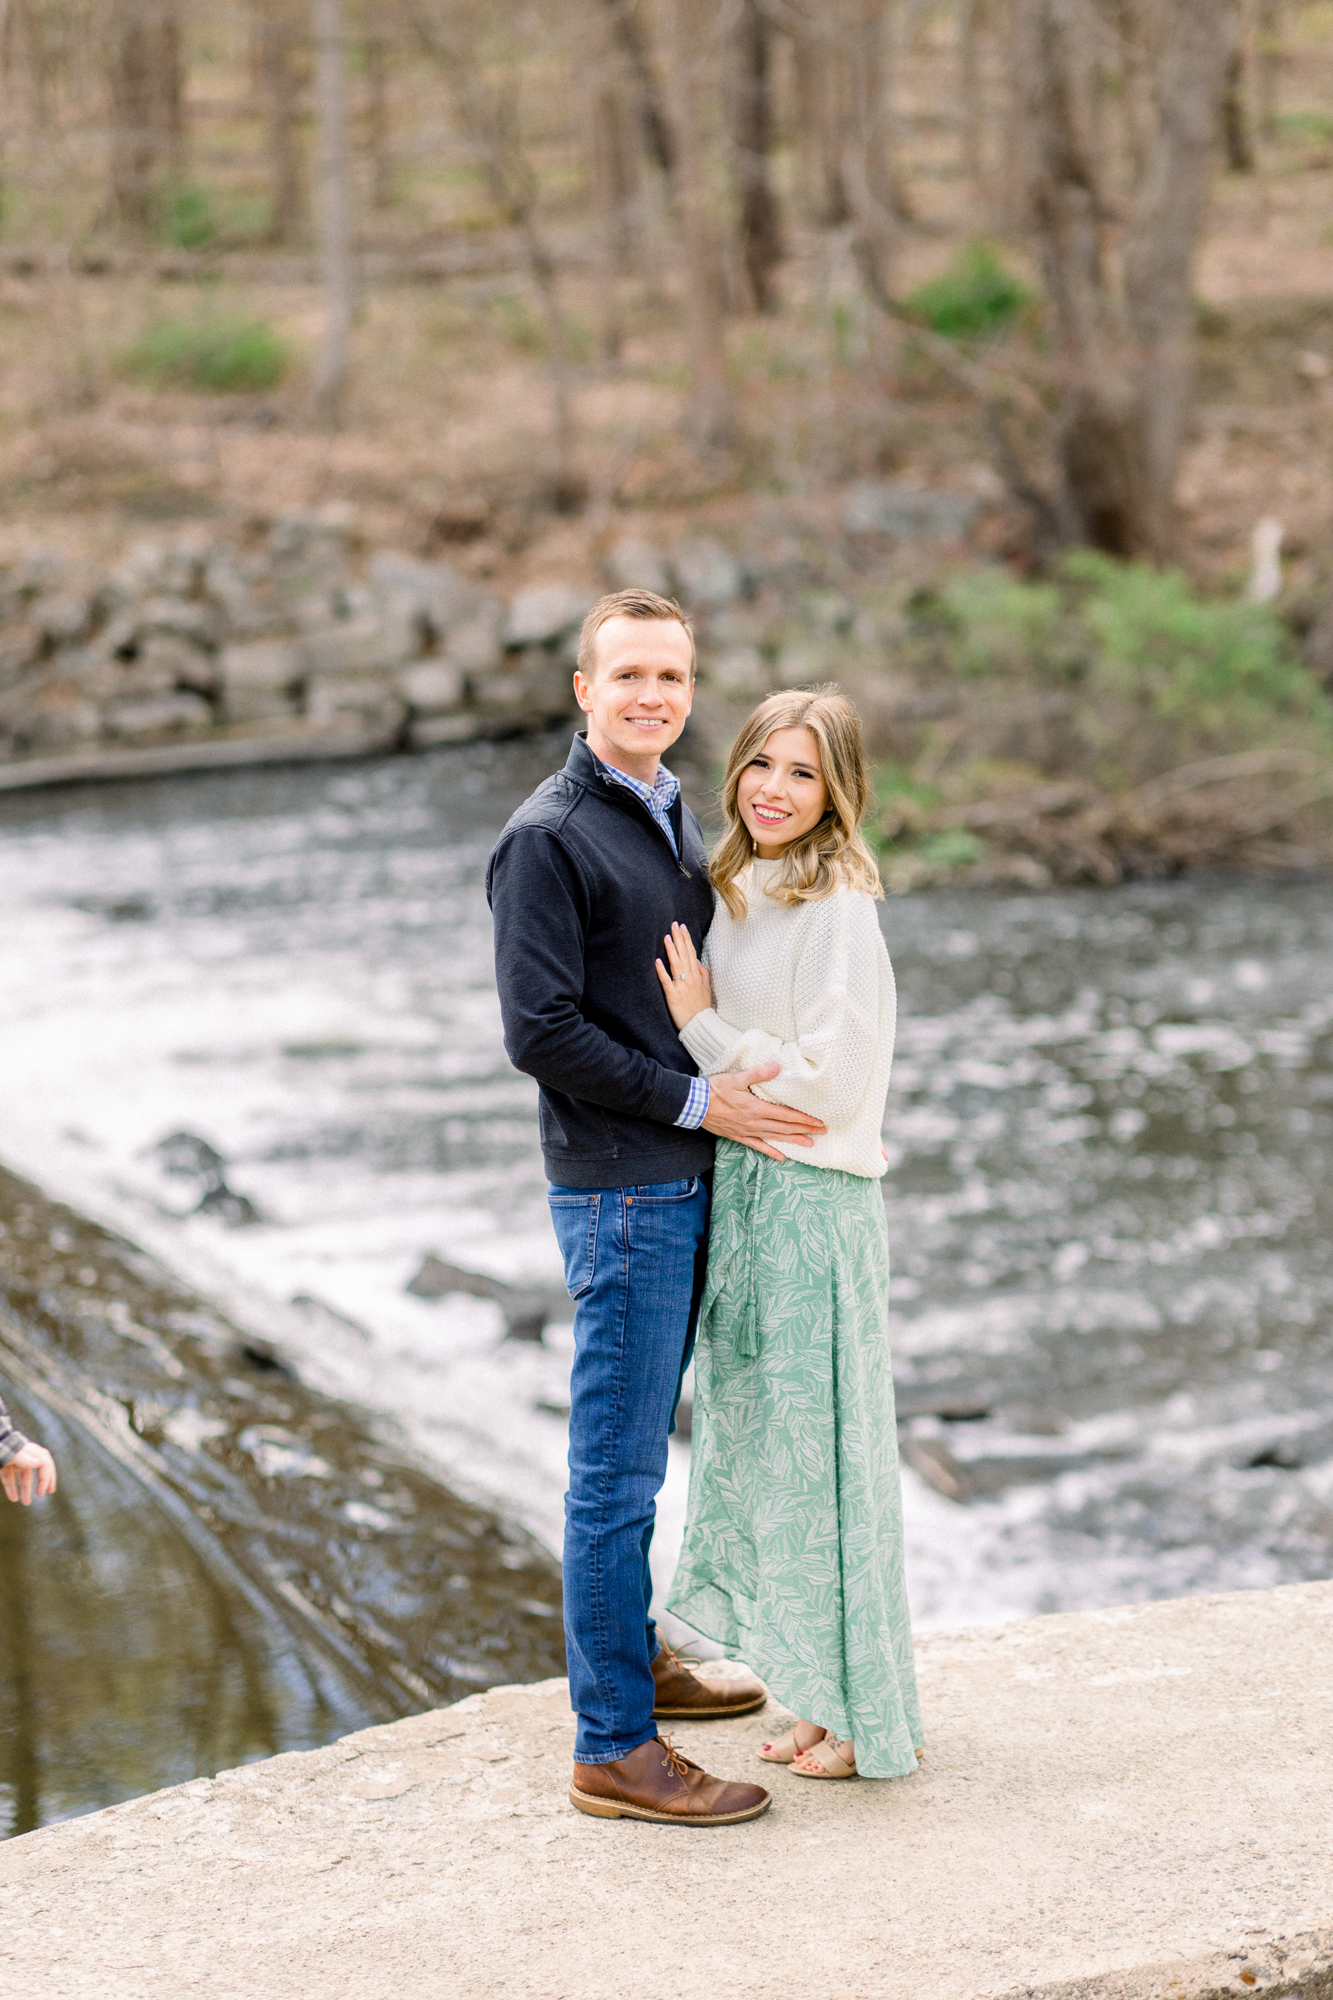 Picture-Perfect Waterloo Village Engagement Photos in Springy New Jersey